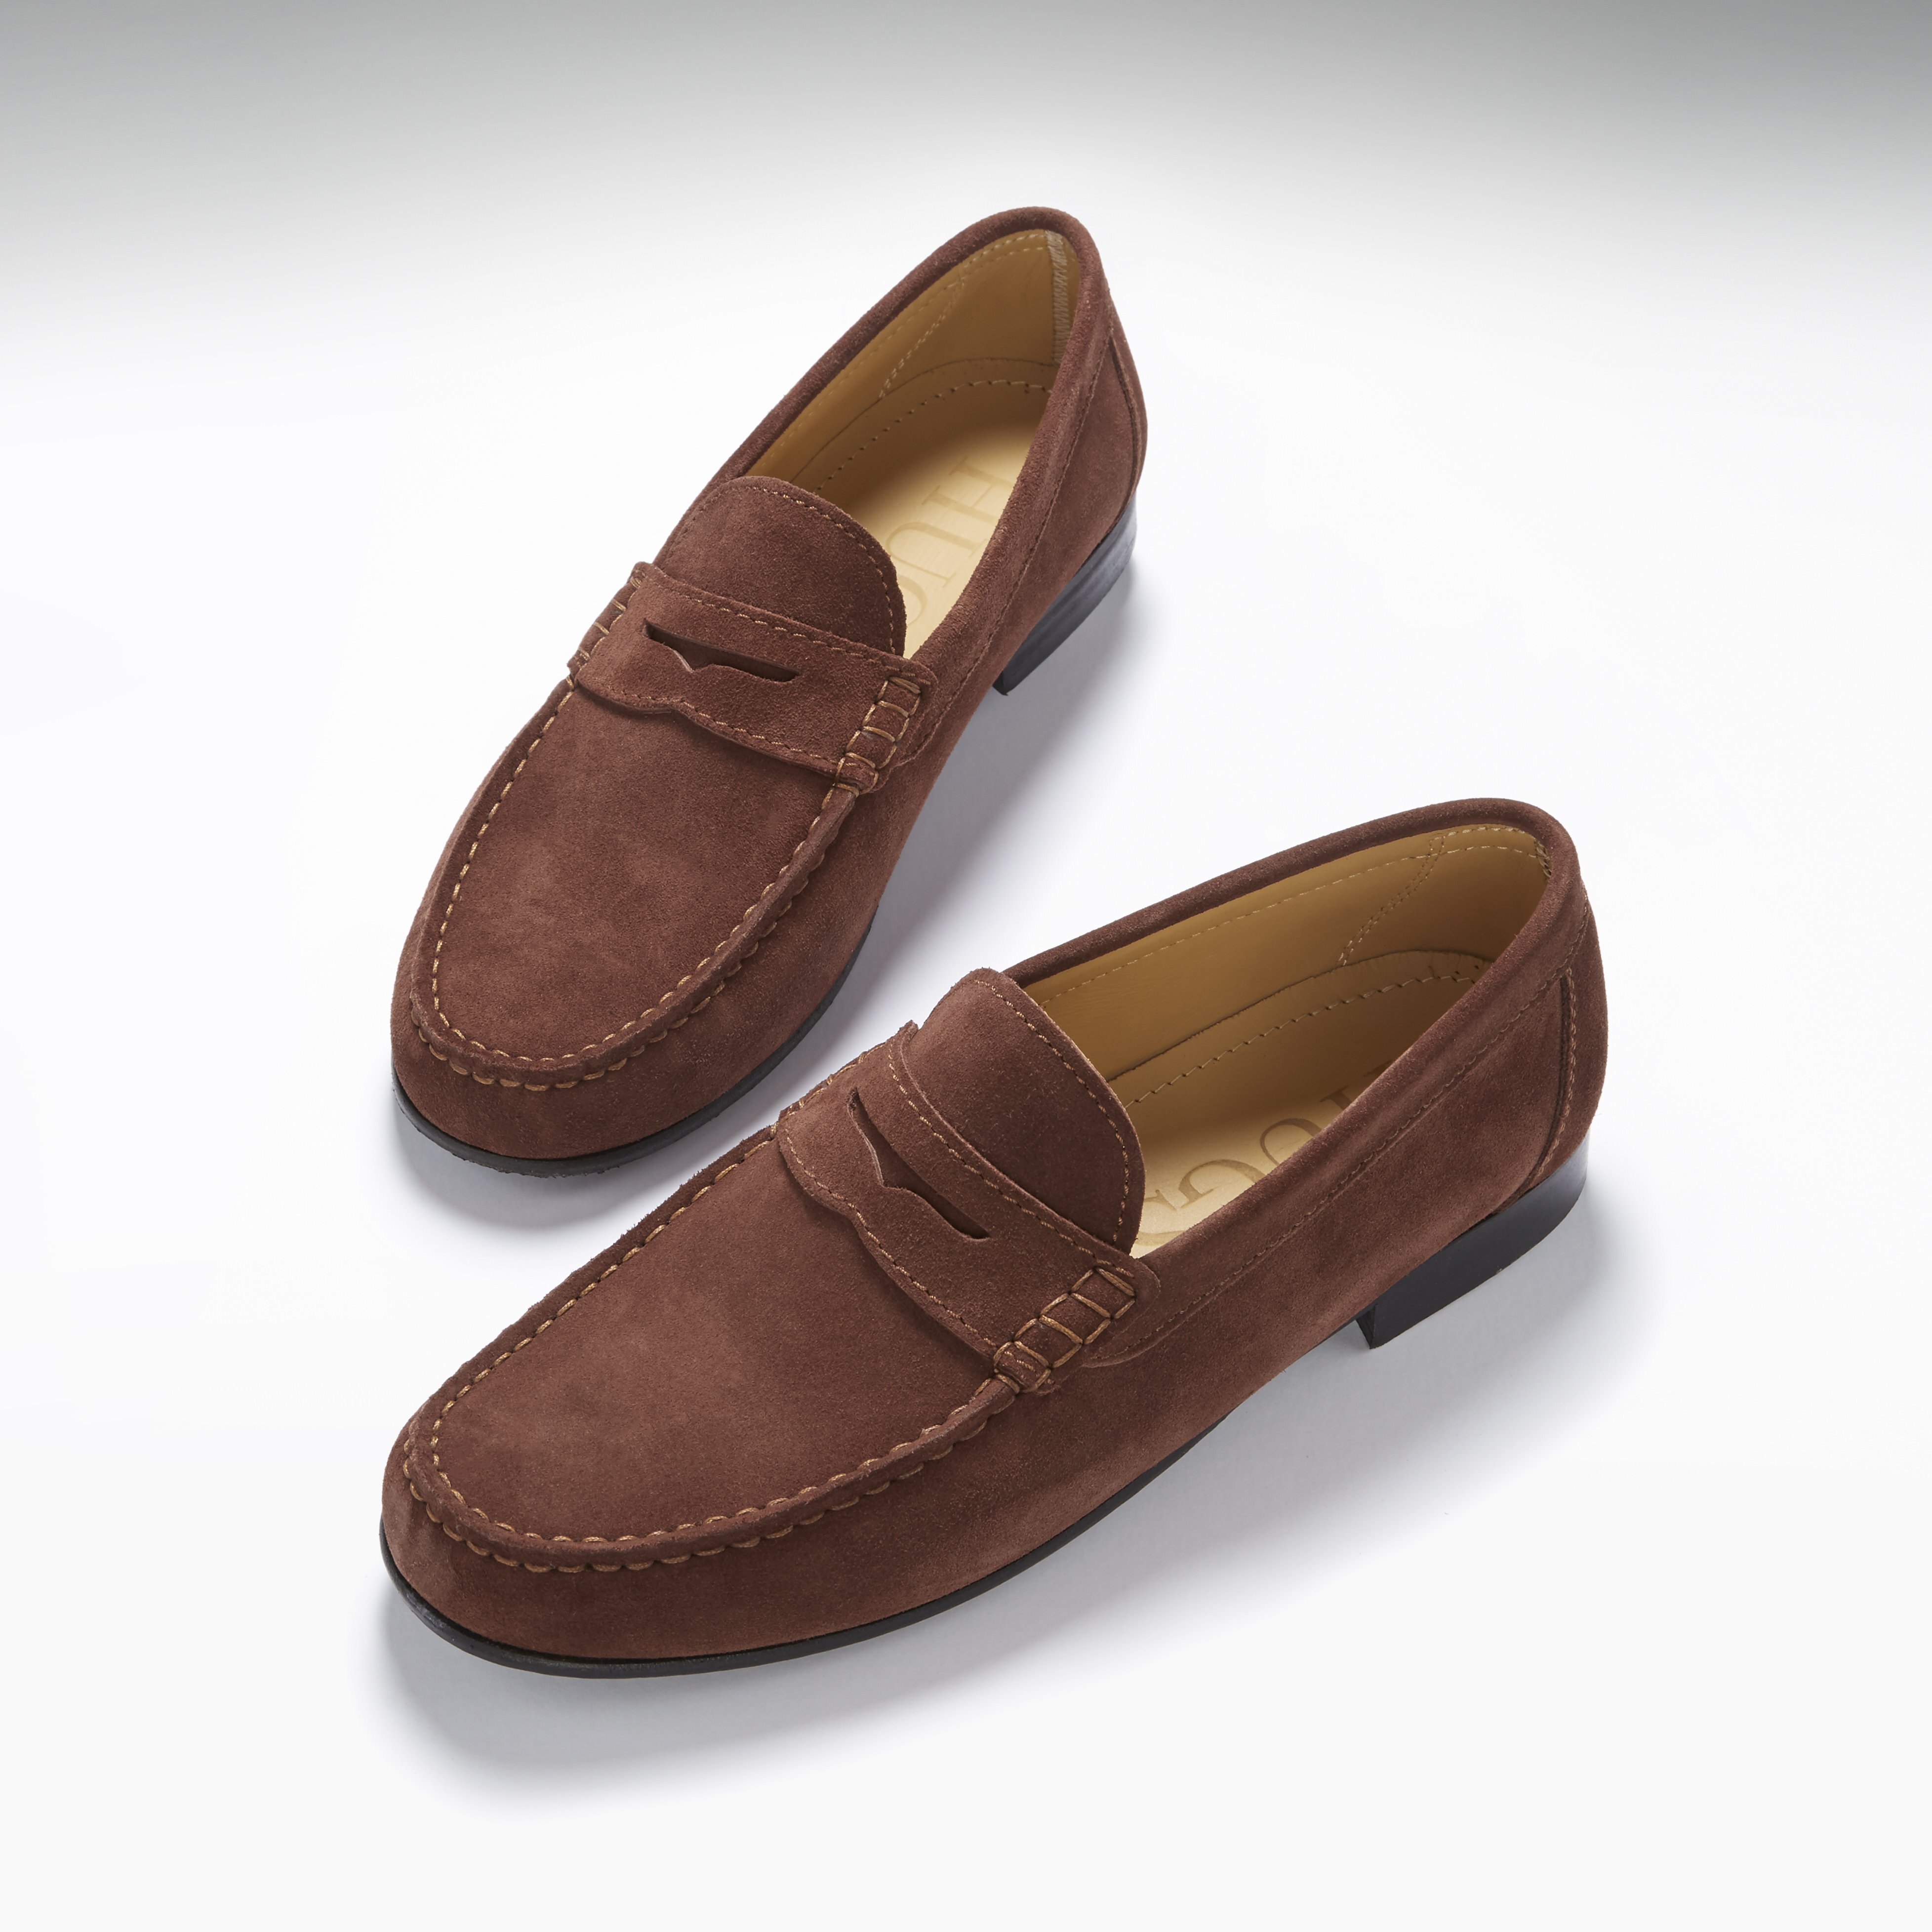 penny loafers men